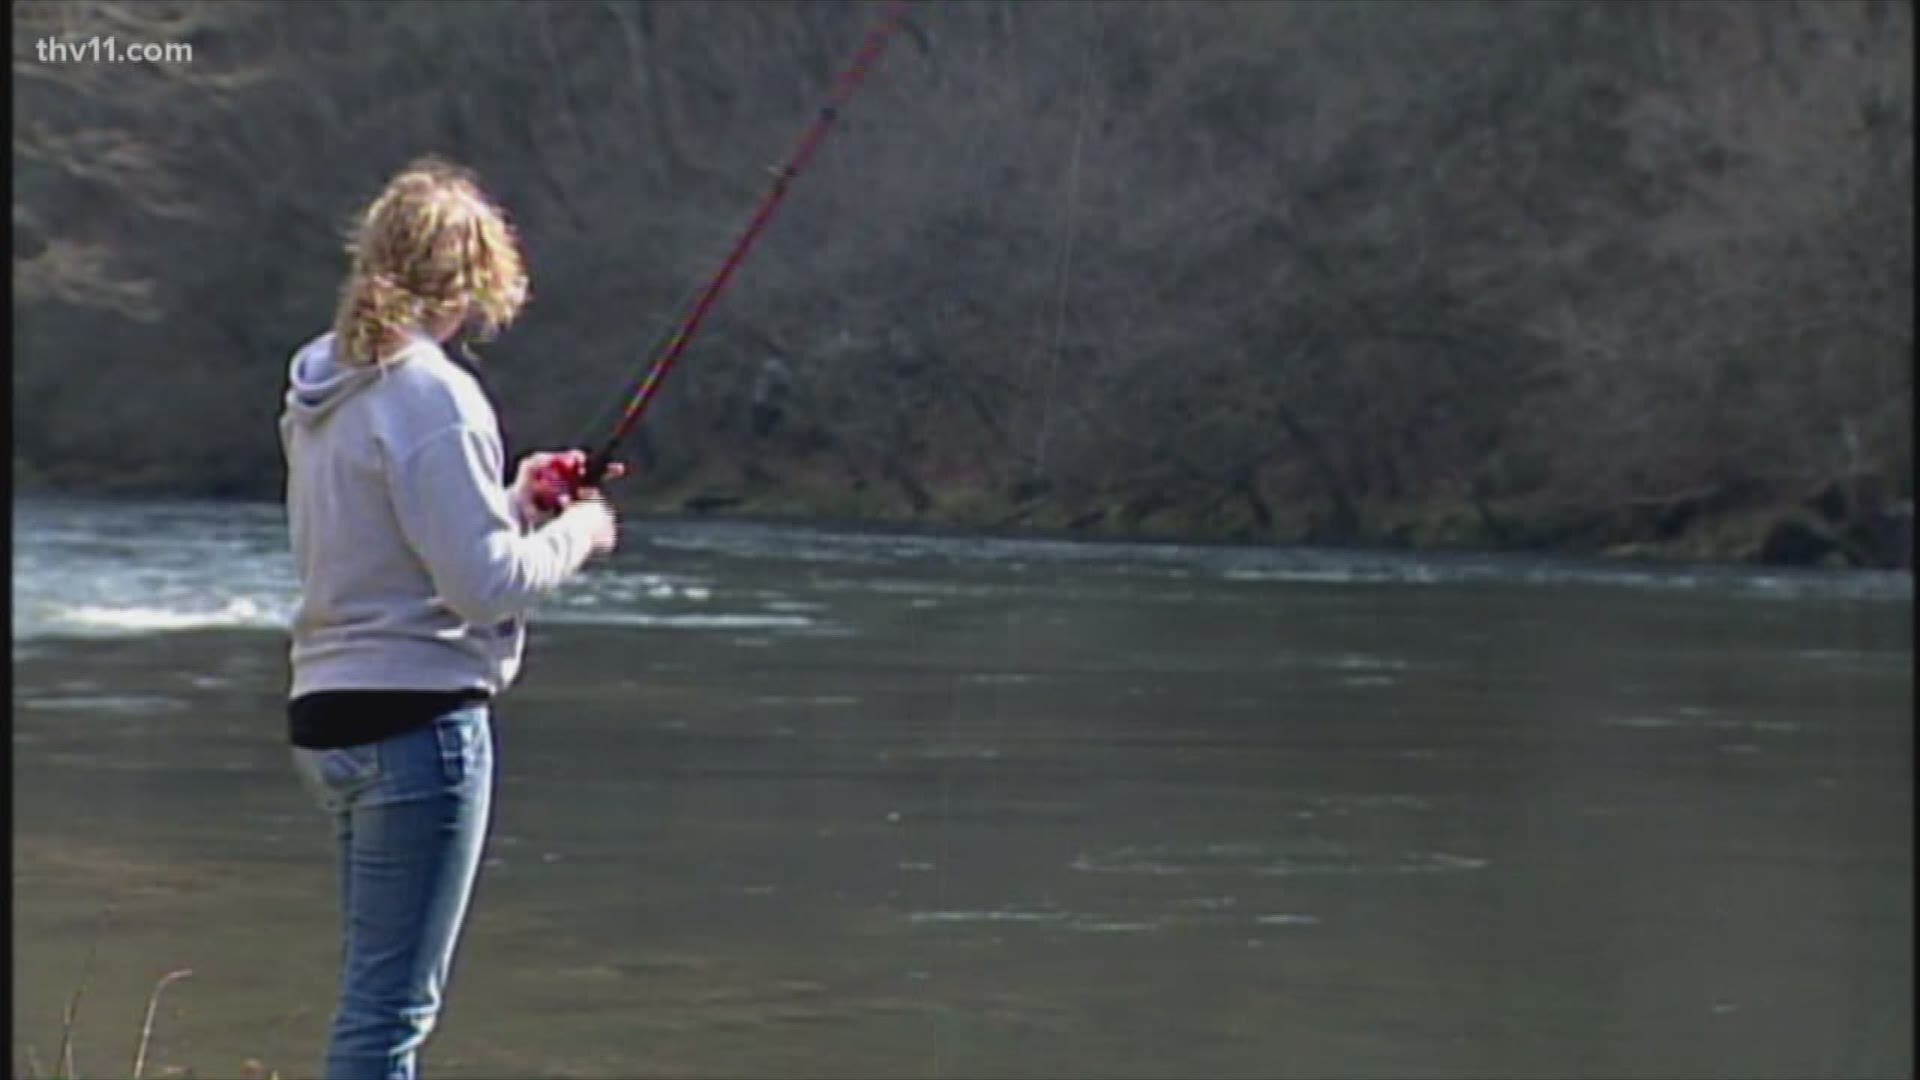 You don't have to have a fishing license or trap permit, just grab a pole and go!